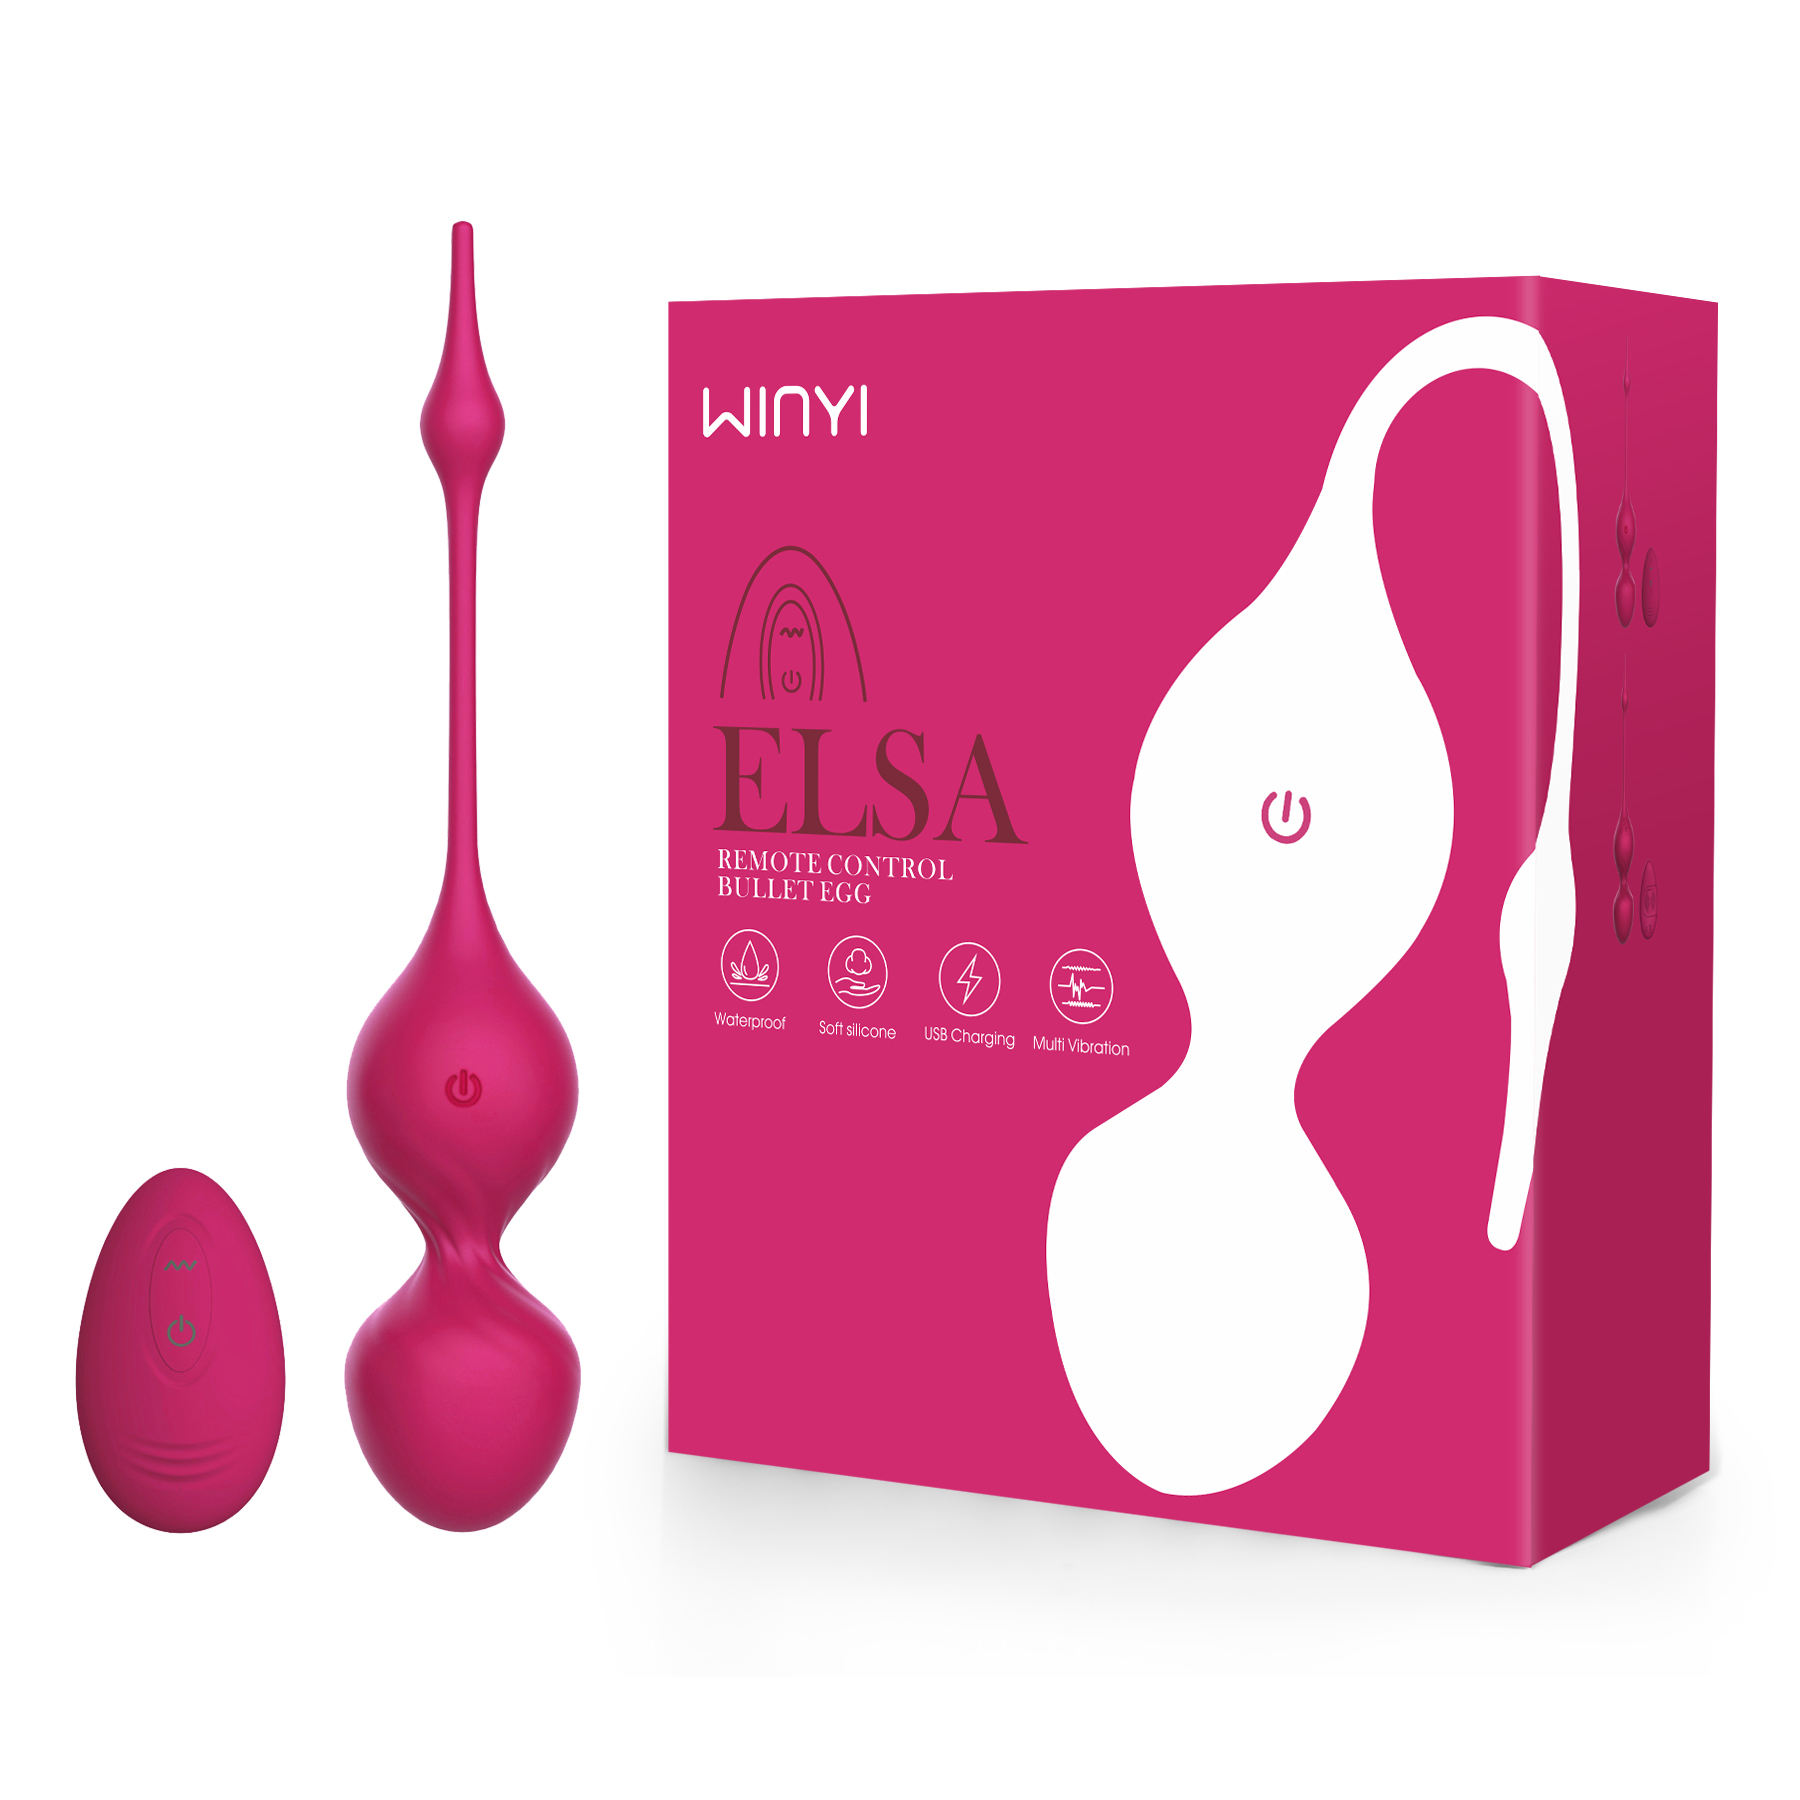 WY0561-wireless egg vibrator-info@szwinyi.com-OEM ODM service available factory-Wide Range Of Quality Products-Industry-trusted Vendor-Private Label full customization-WINYI-Official Websiteszwinyi.com/winyi.net